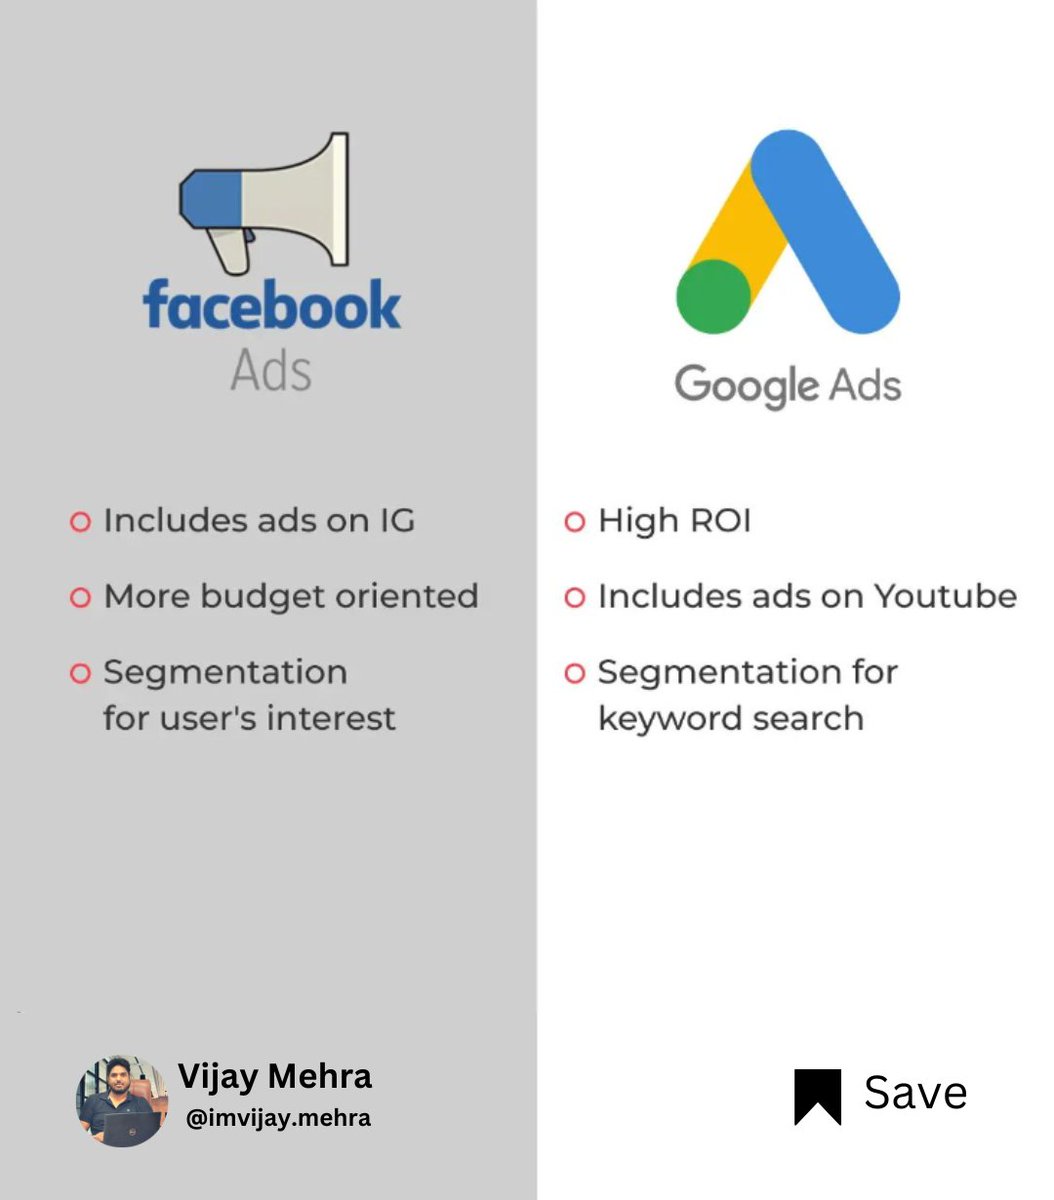 GOOGLE ADS or FACEBOOK ADS?

Follow for more tips and tricks @imvijaymehra 
Turn on post notifications
Save this for later
Tag your friend who needs to see this

Let’s Grow Together!⁣

Join me and let’s build a valuable community

#digitalamarketing #smm23 #socialmediamarketing